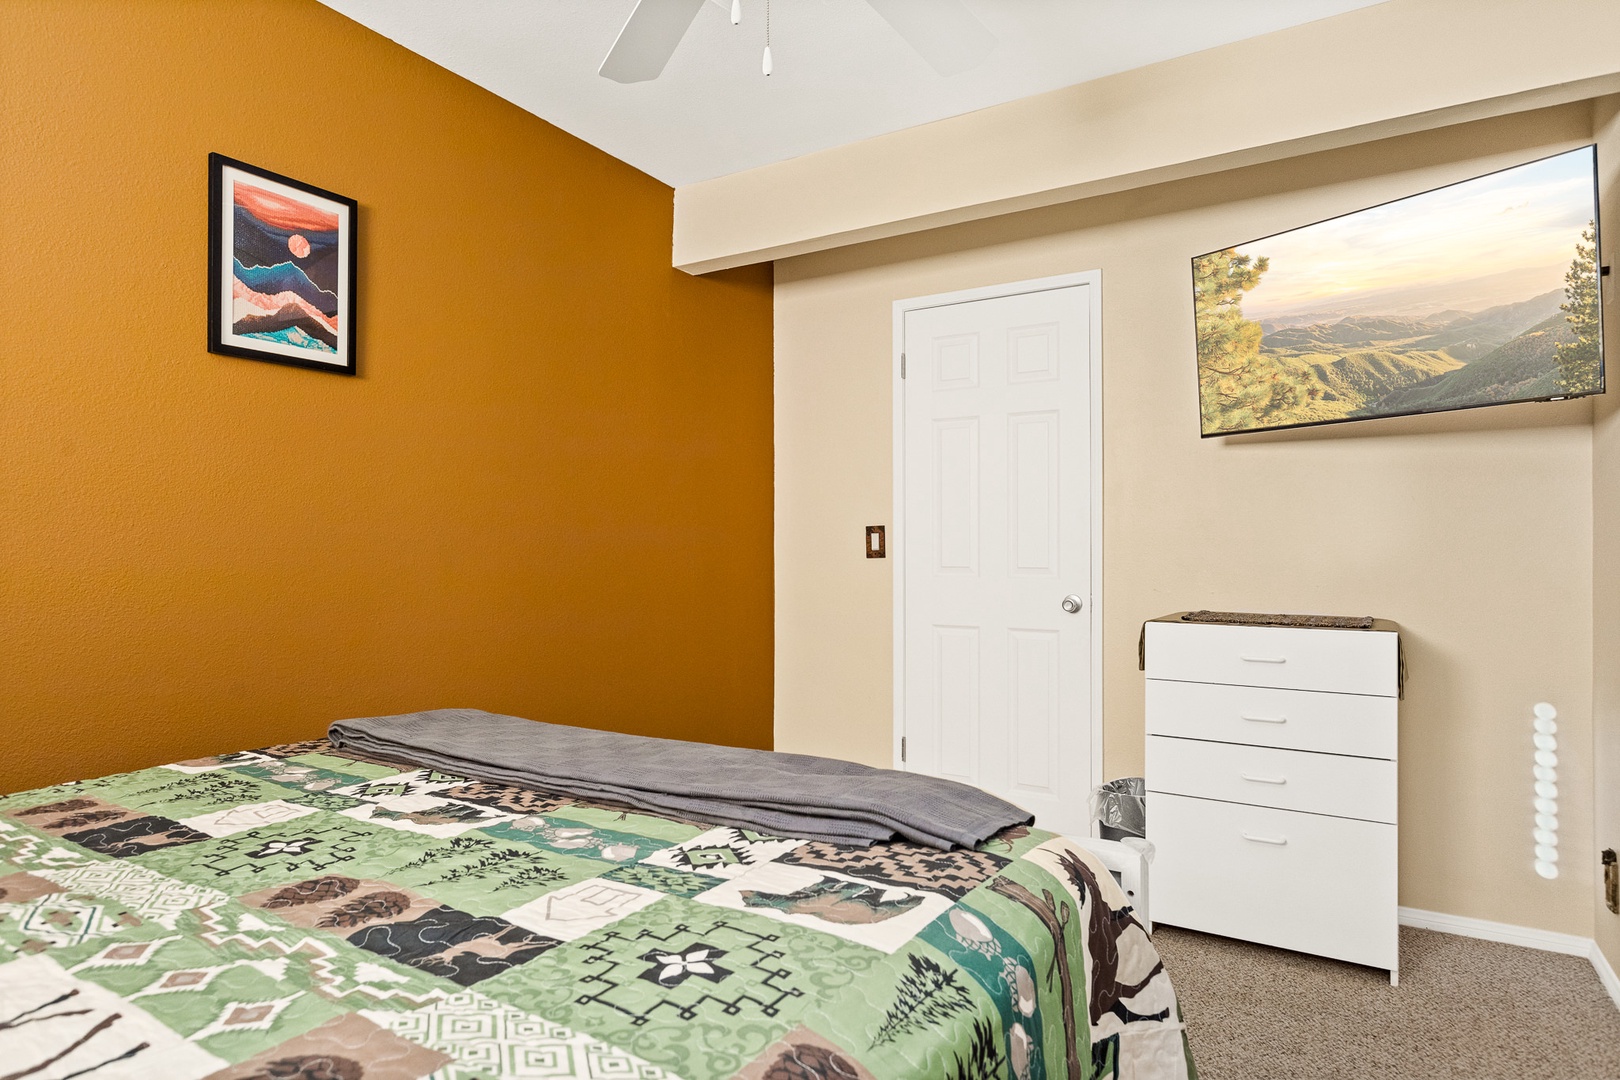 The 2nd of two bedrooms includes a queen bed, ceiling fan, & walk-in closet